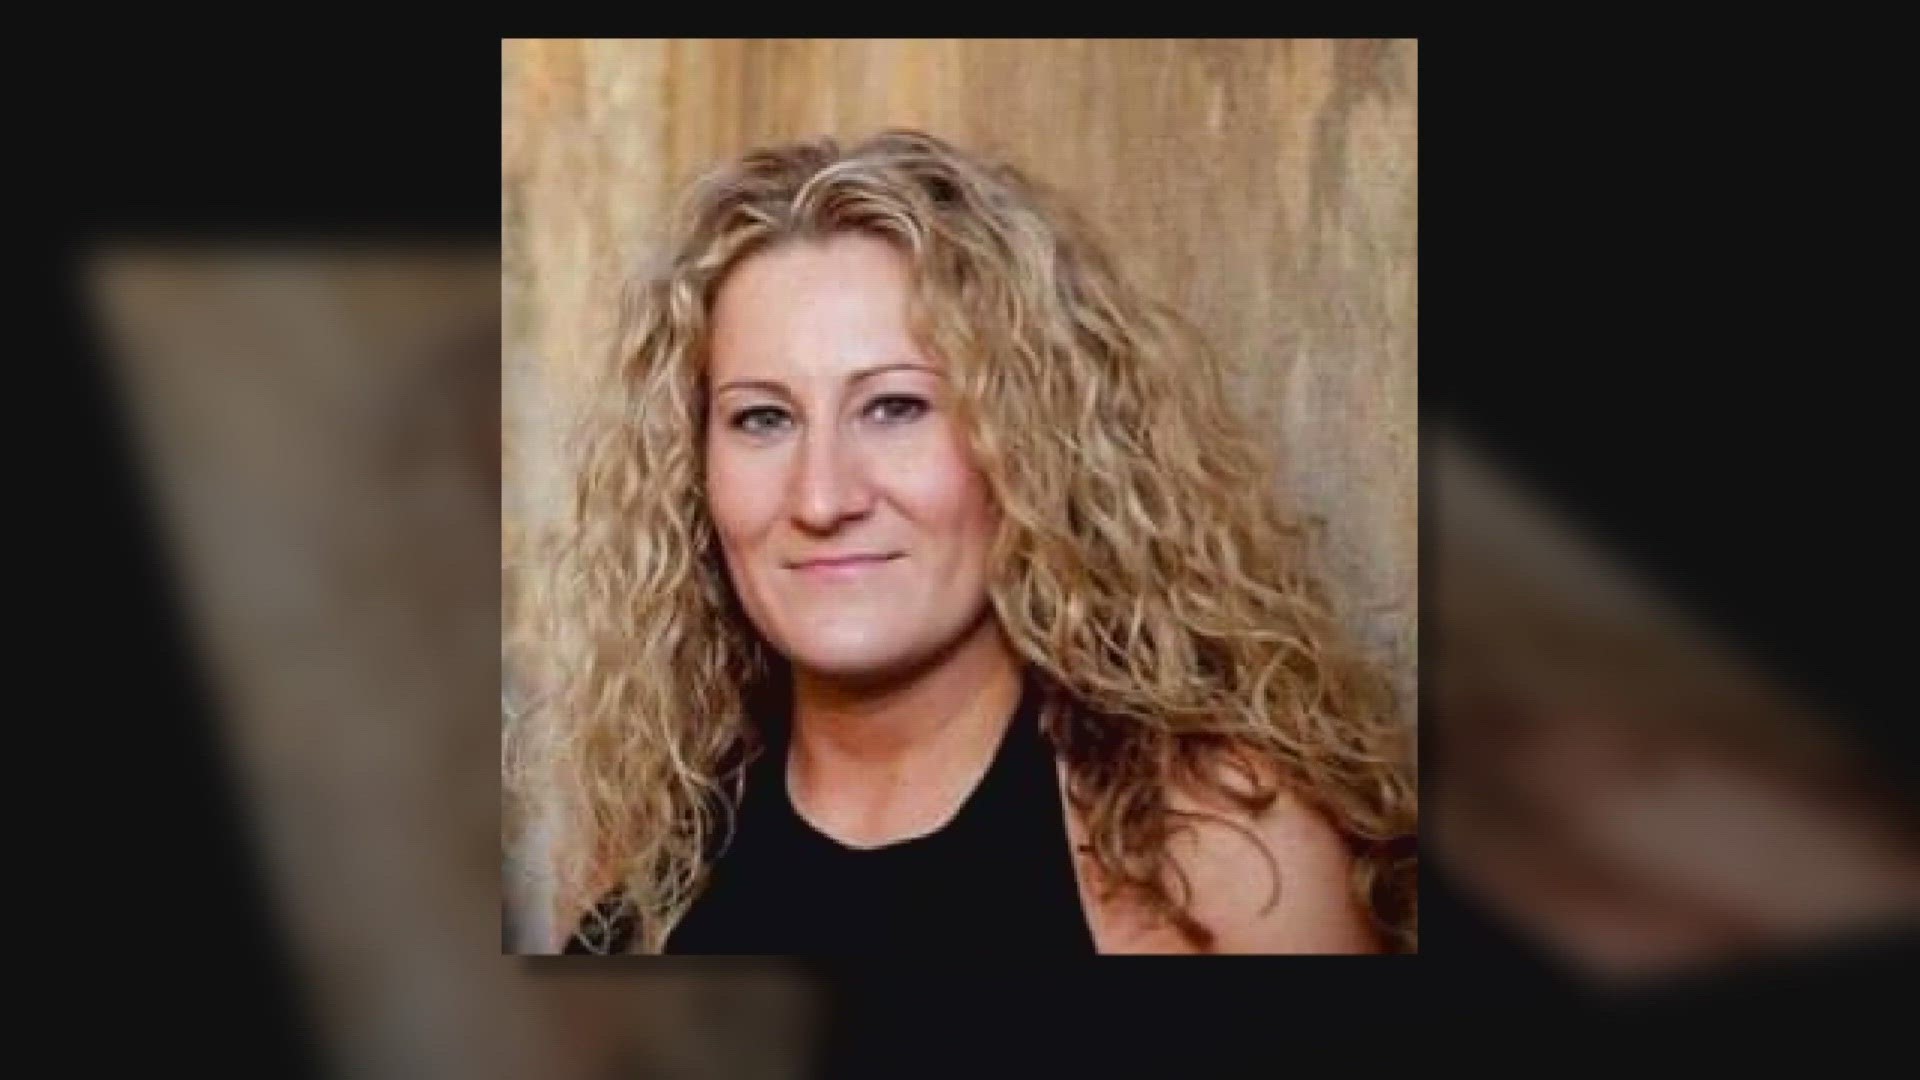 Officers found 46-year-old Kimberly Knapp, an attorney with an office in Fort Worth, on a bed in the Saginaw home with a gunshot wound to her chest.